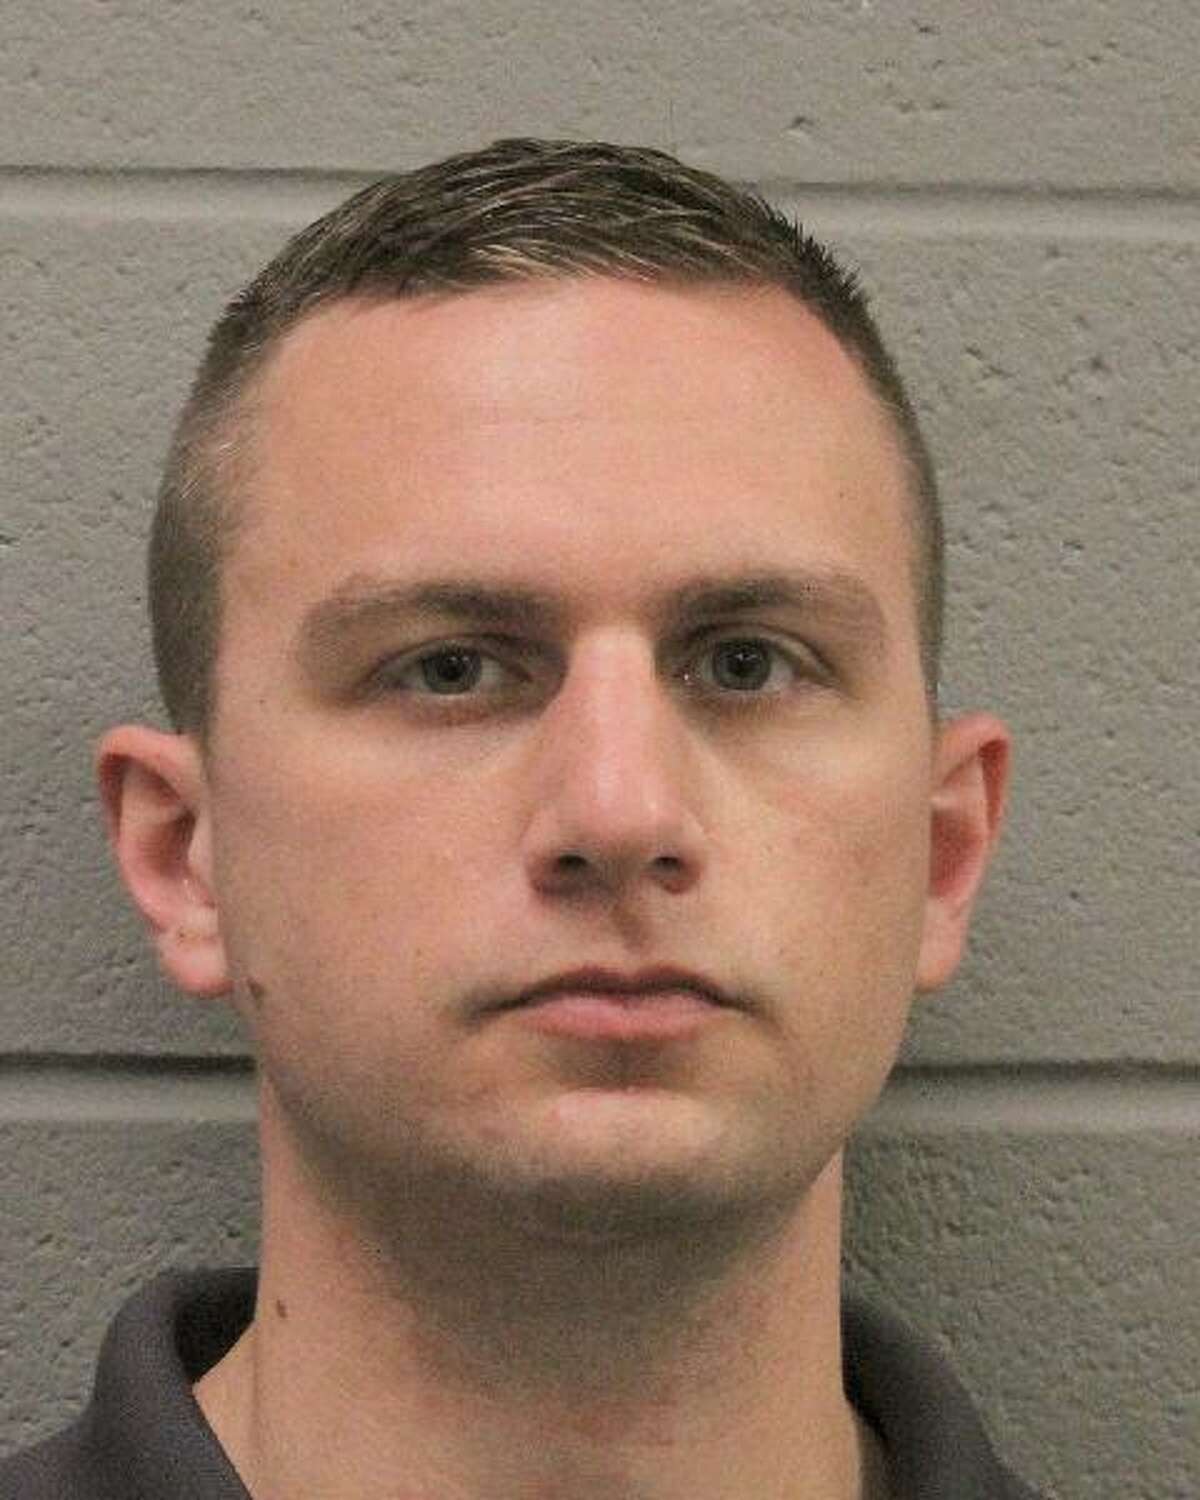 Police said in a statement the officer, 29-year-old Justin Weber, has been relieved of duty.